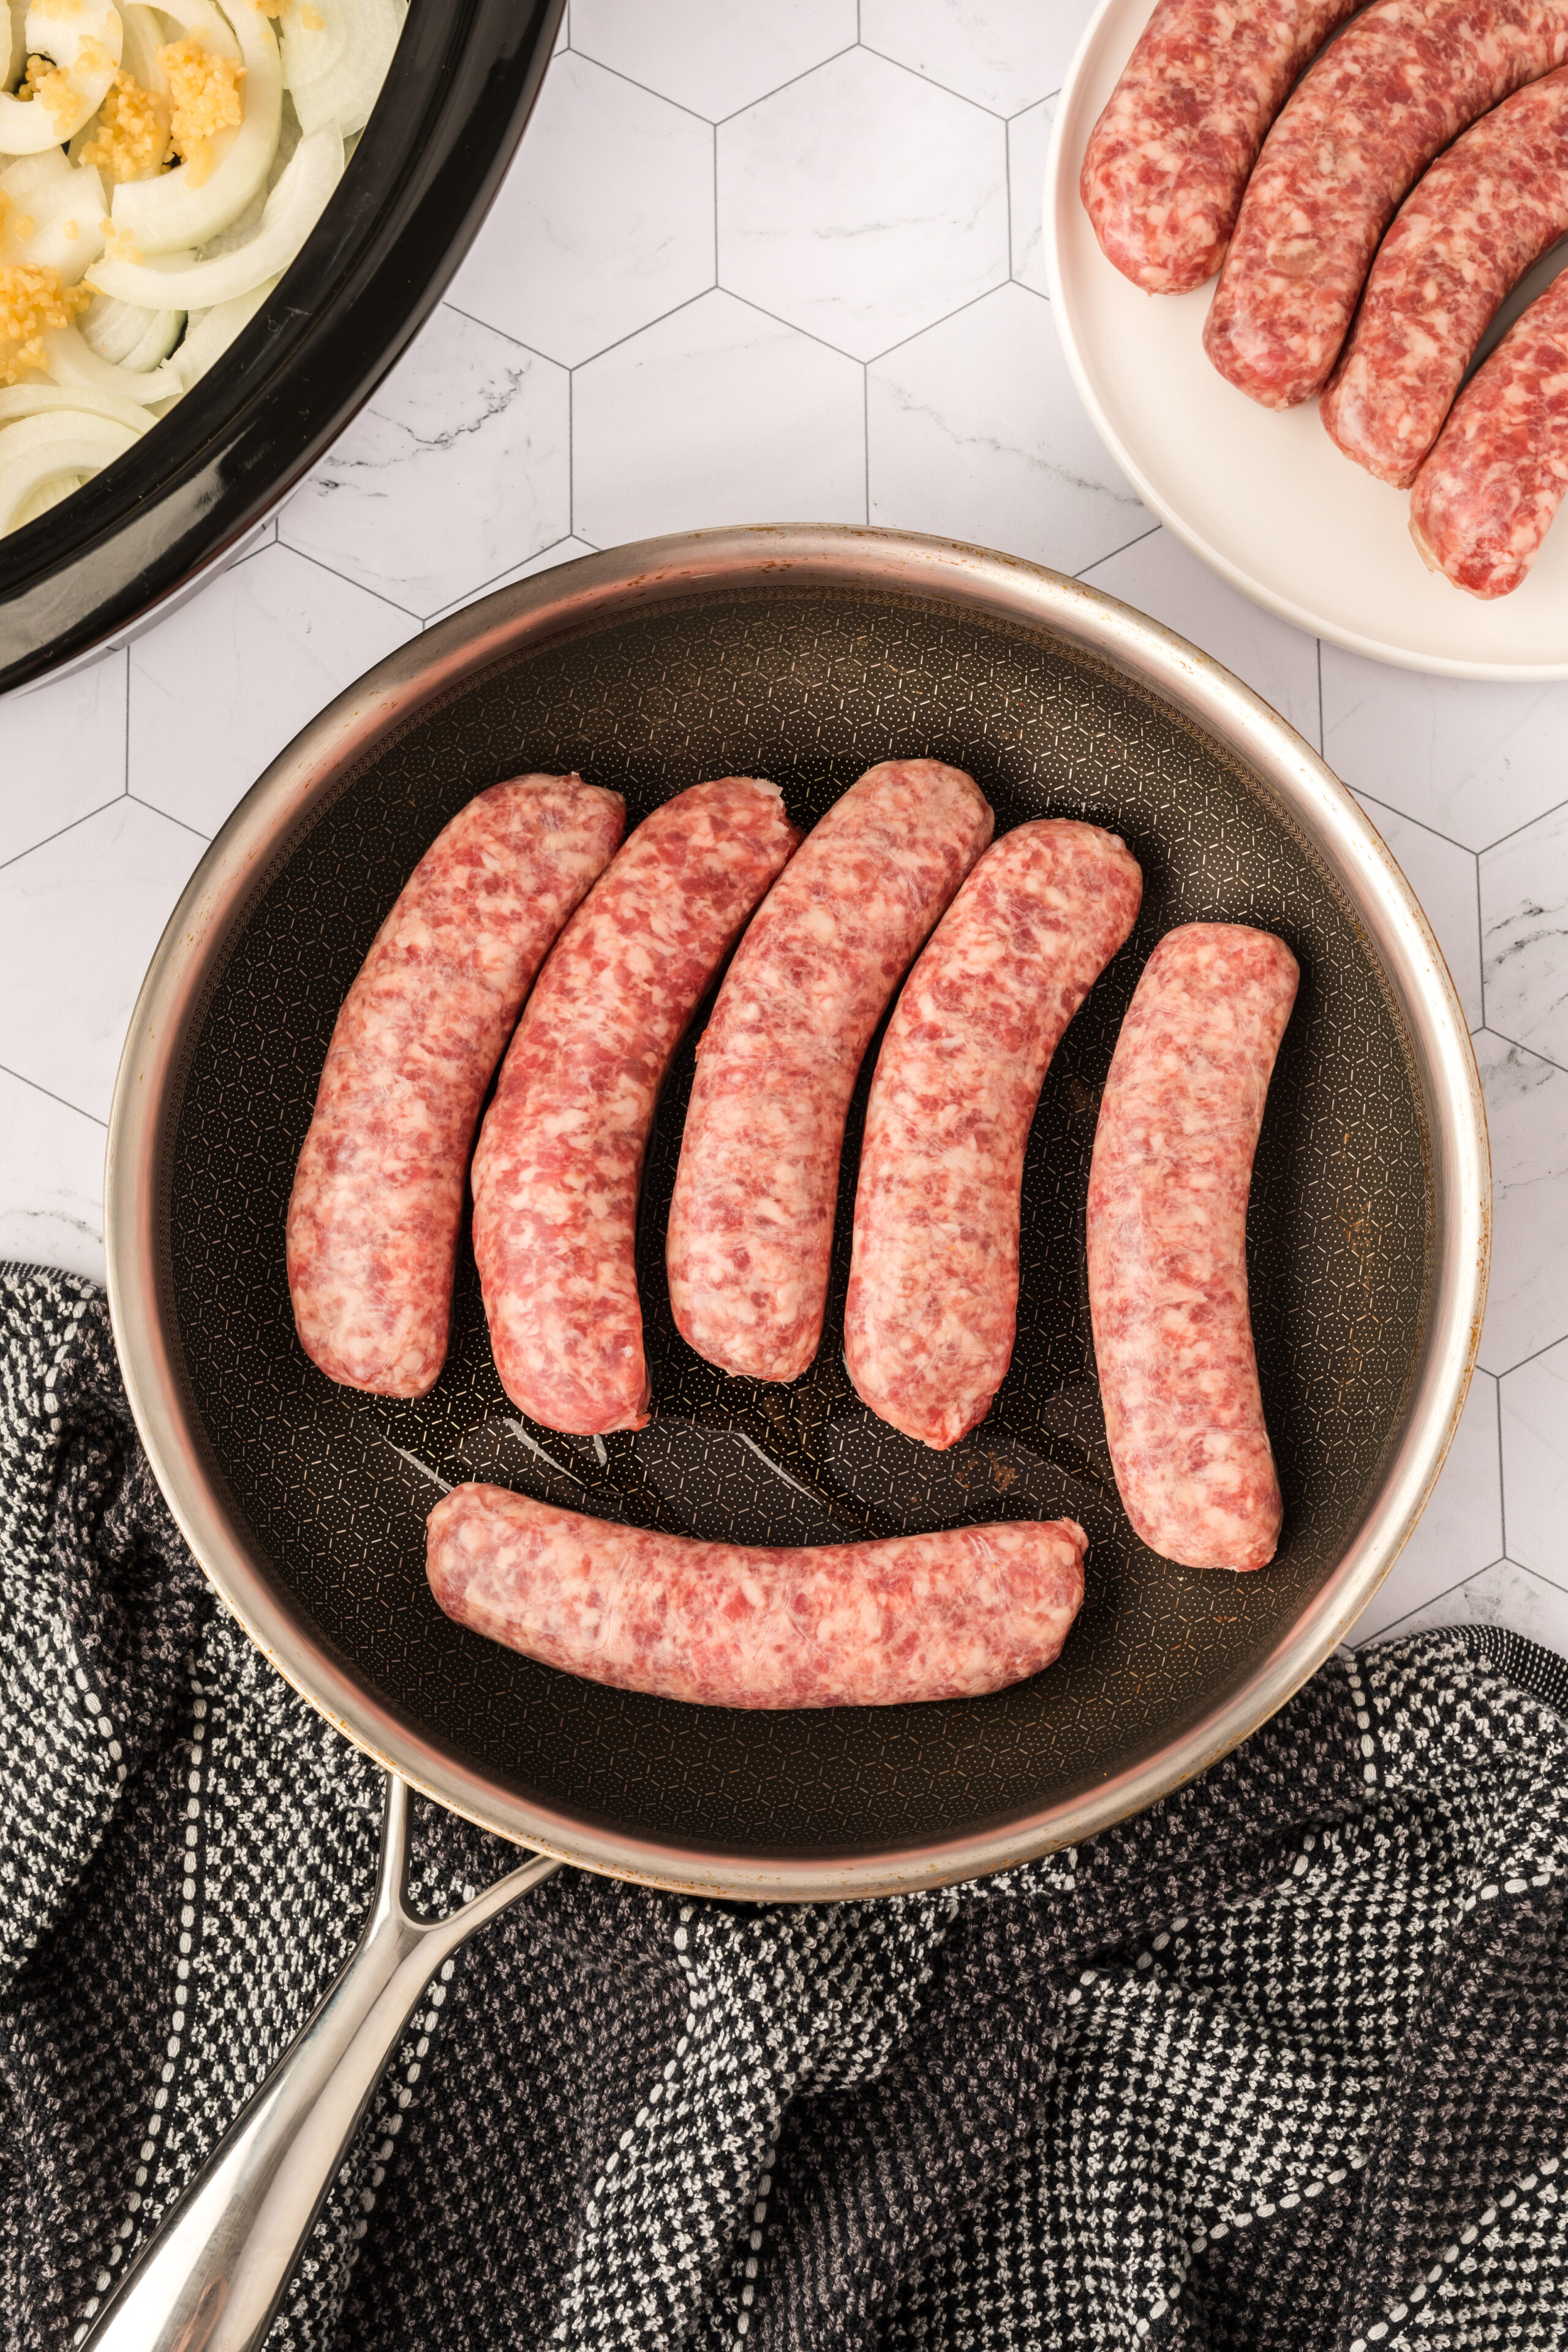 Searing the brats in a skillet